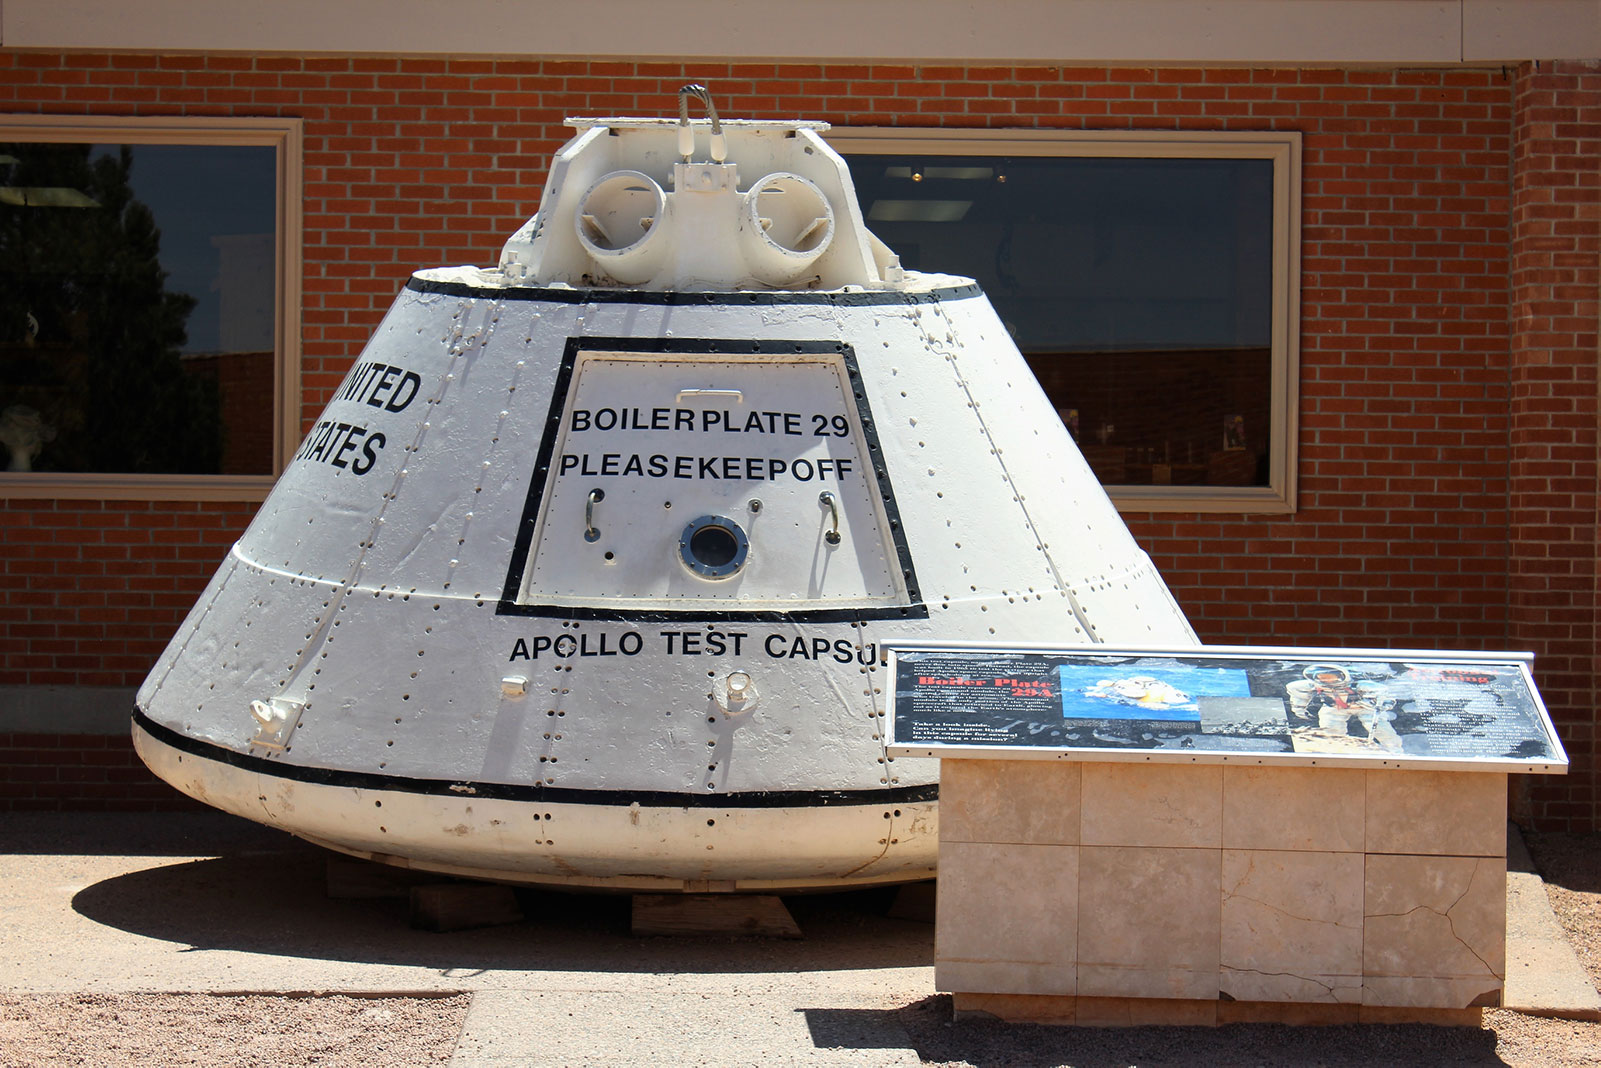 A shuttle capsule at the Astronaut Memorial Park at Meteor Crater in Arizona.